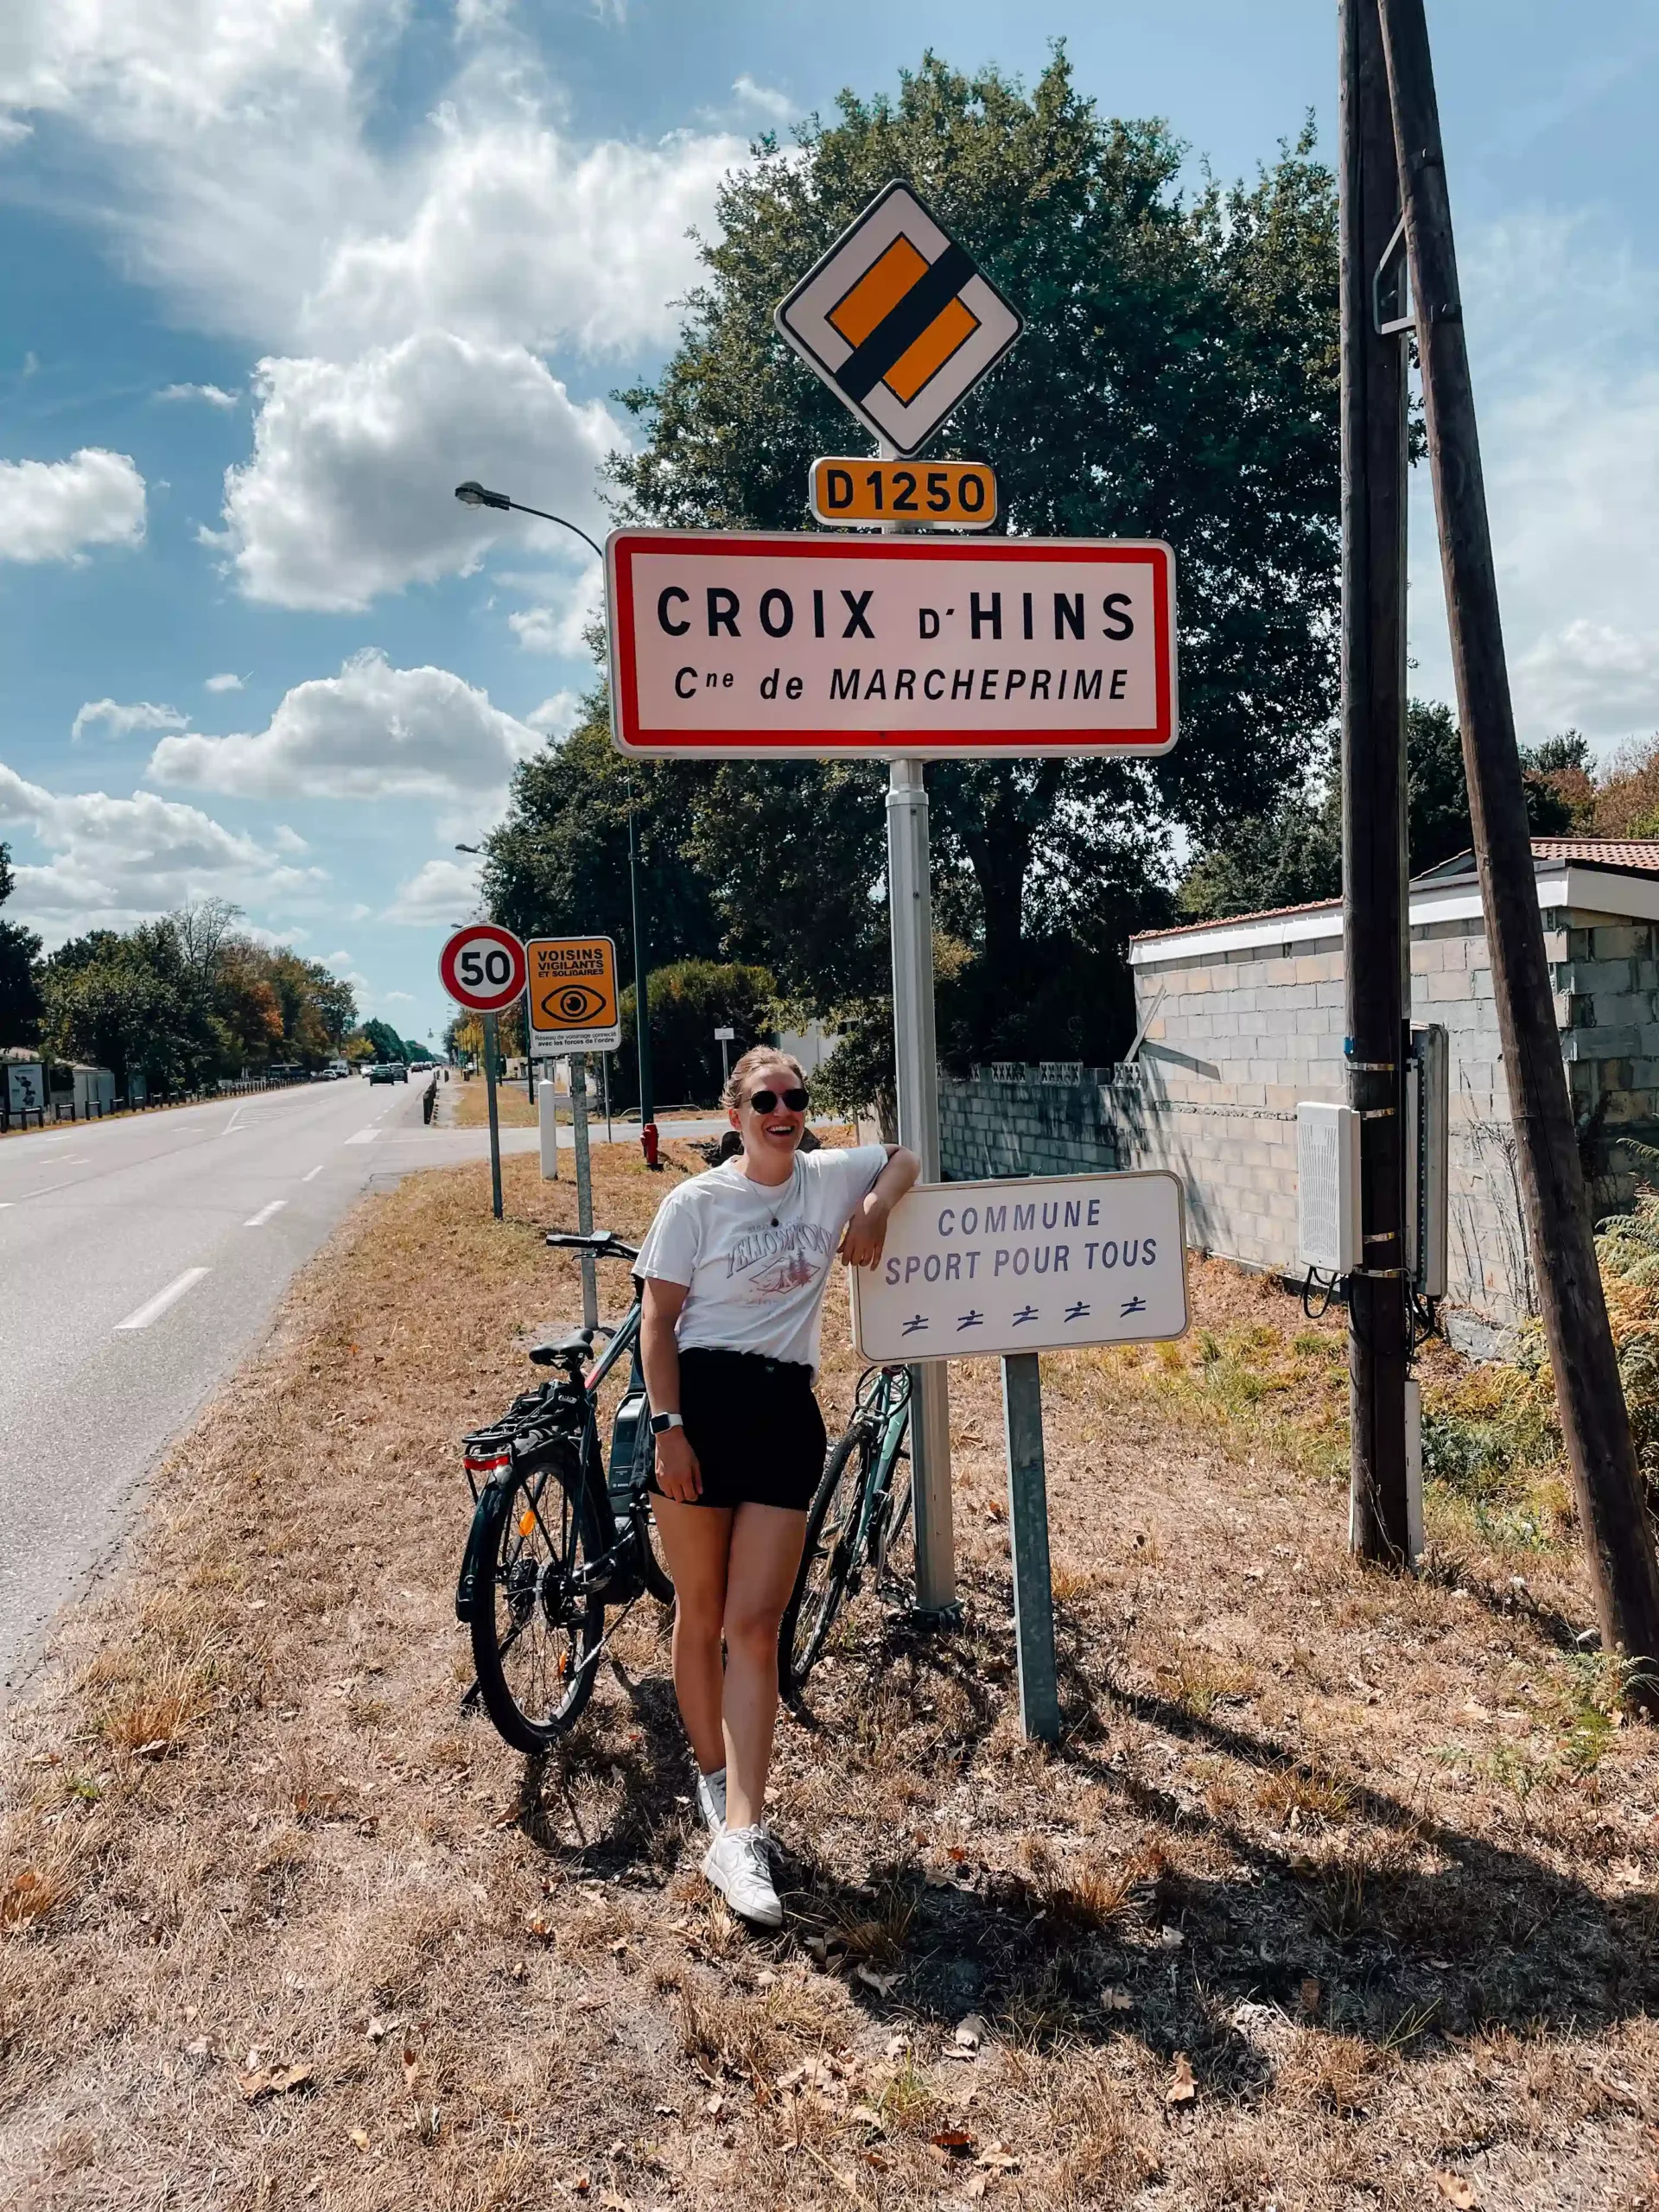 A girl stands with 2 bikes behind her with her arm on a road sign 